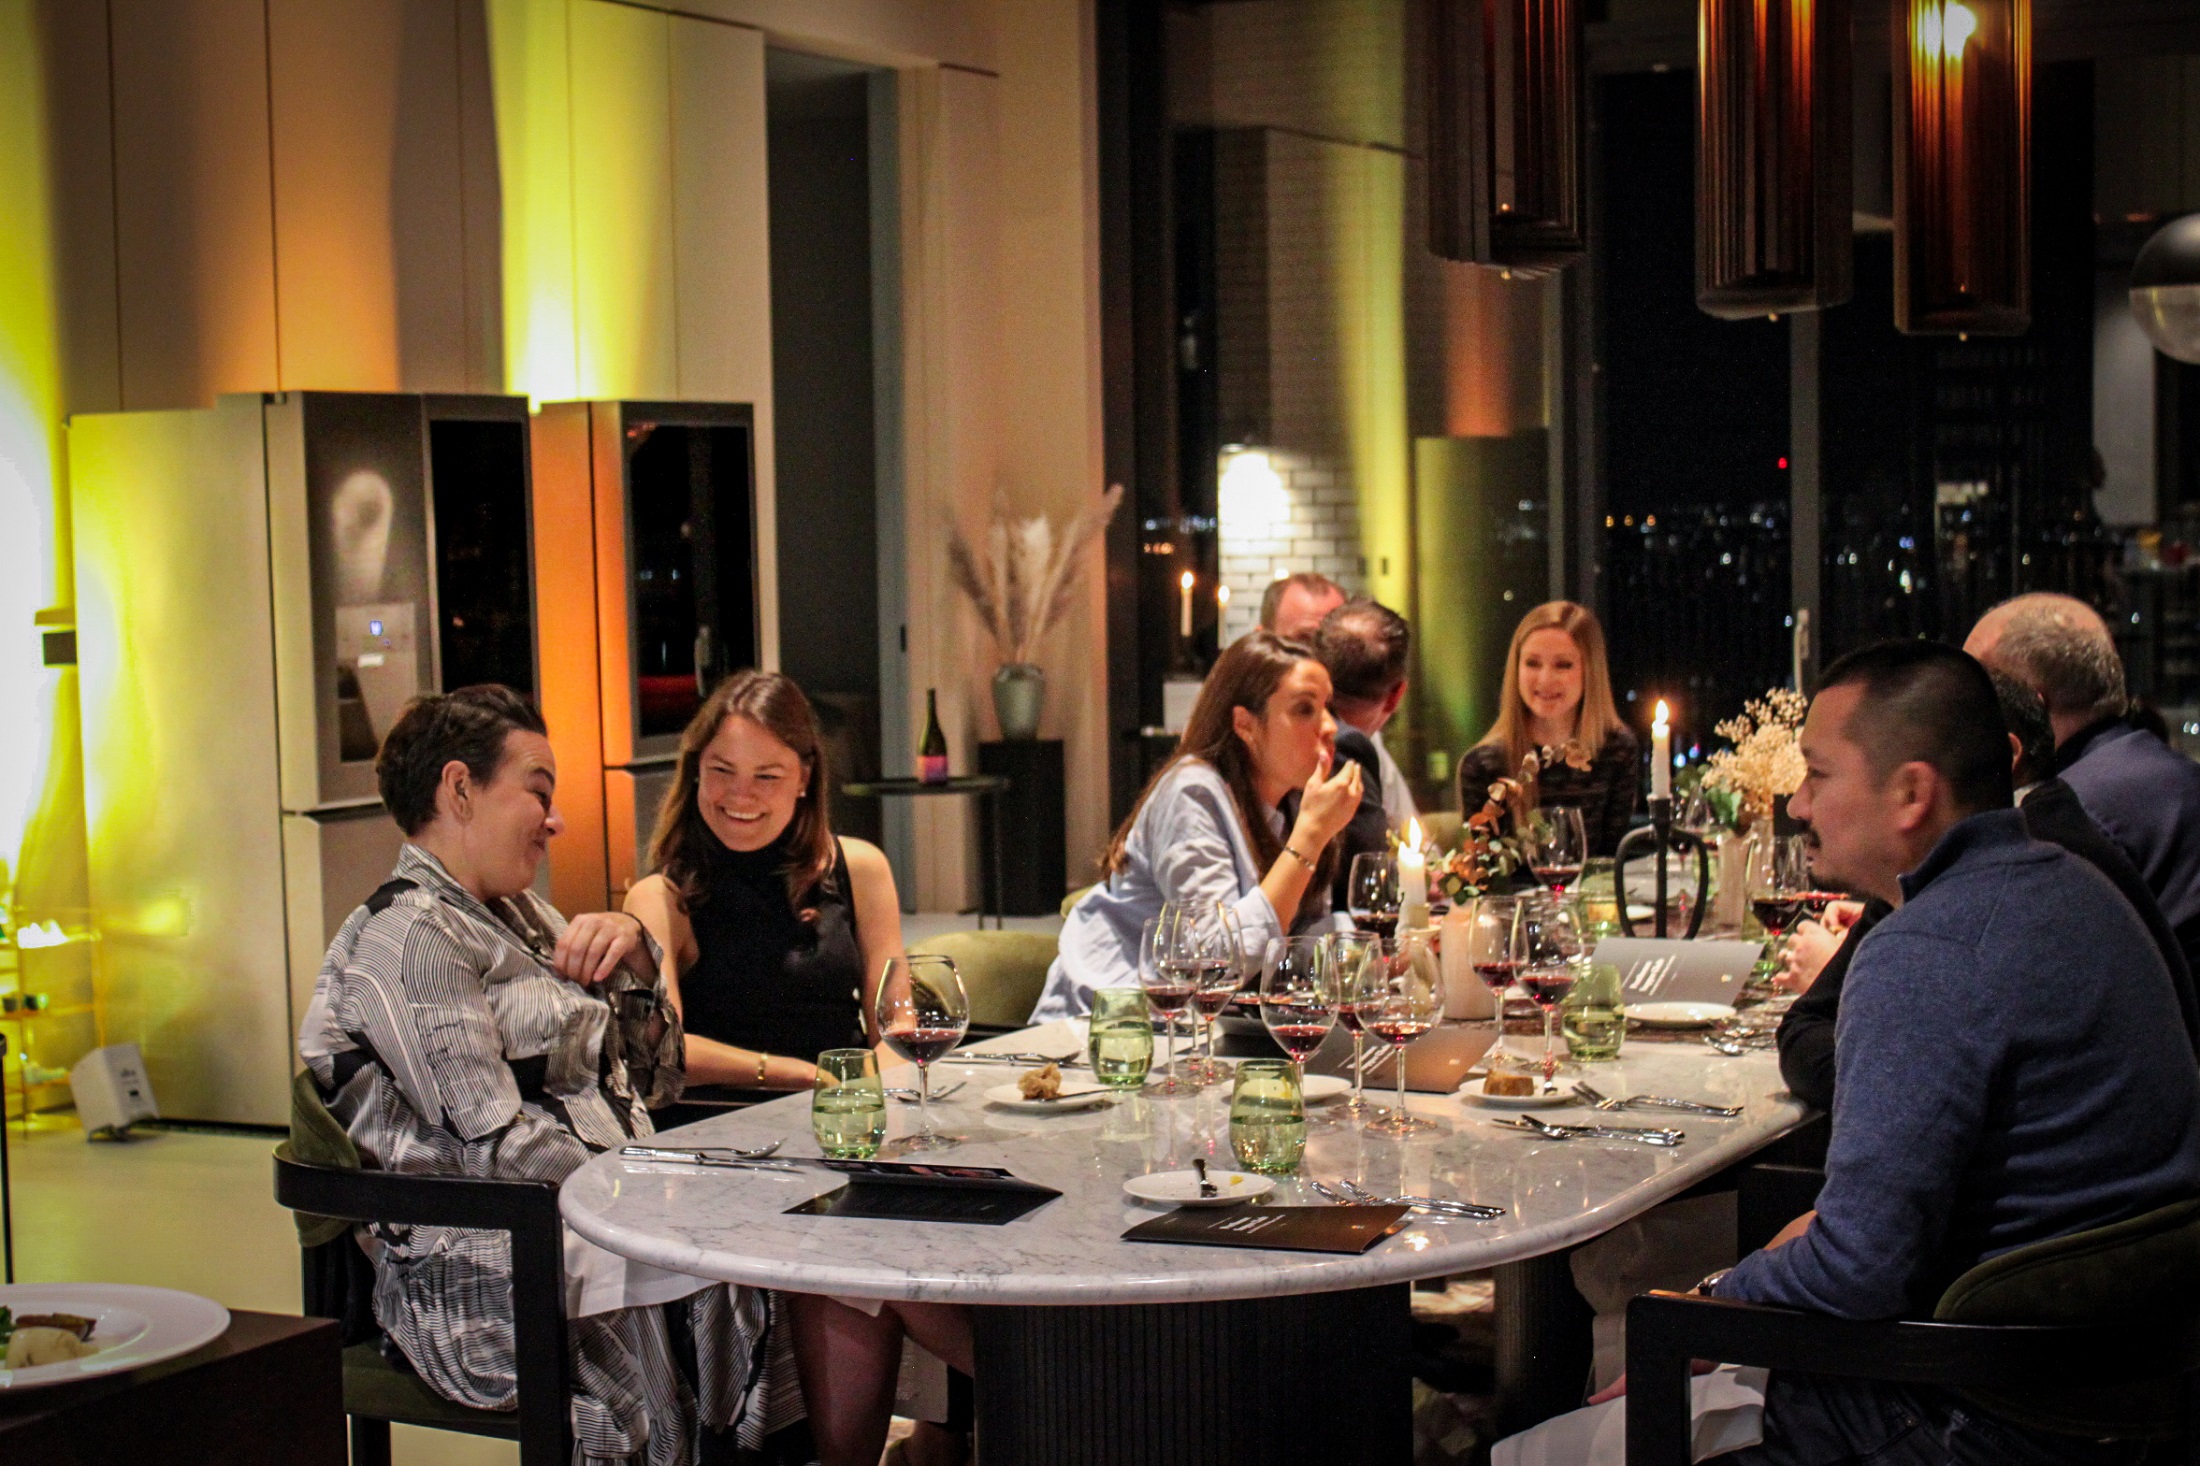 Guests of LG SIGNATURE’s wine tasting series enjoying conversation and wine around a table at London Restaurant Festival